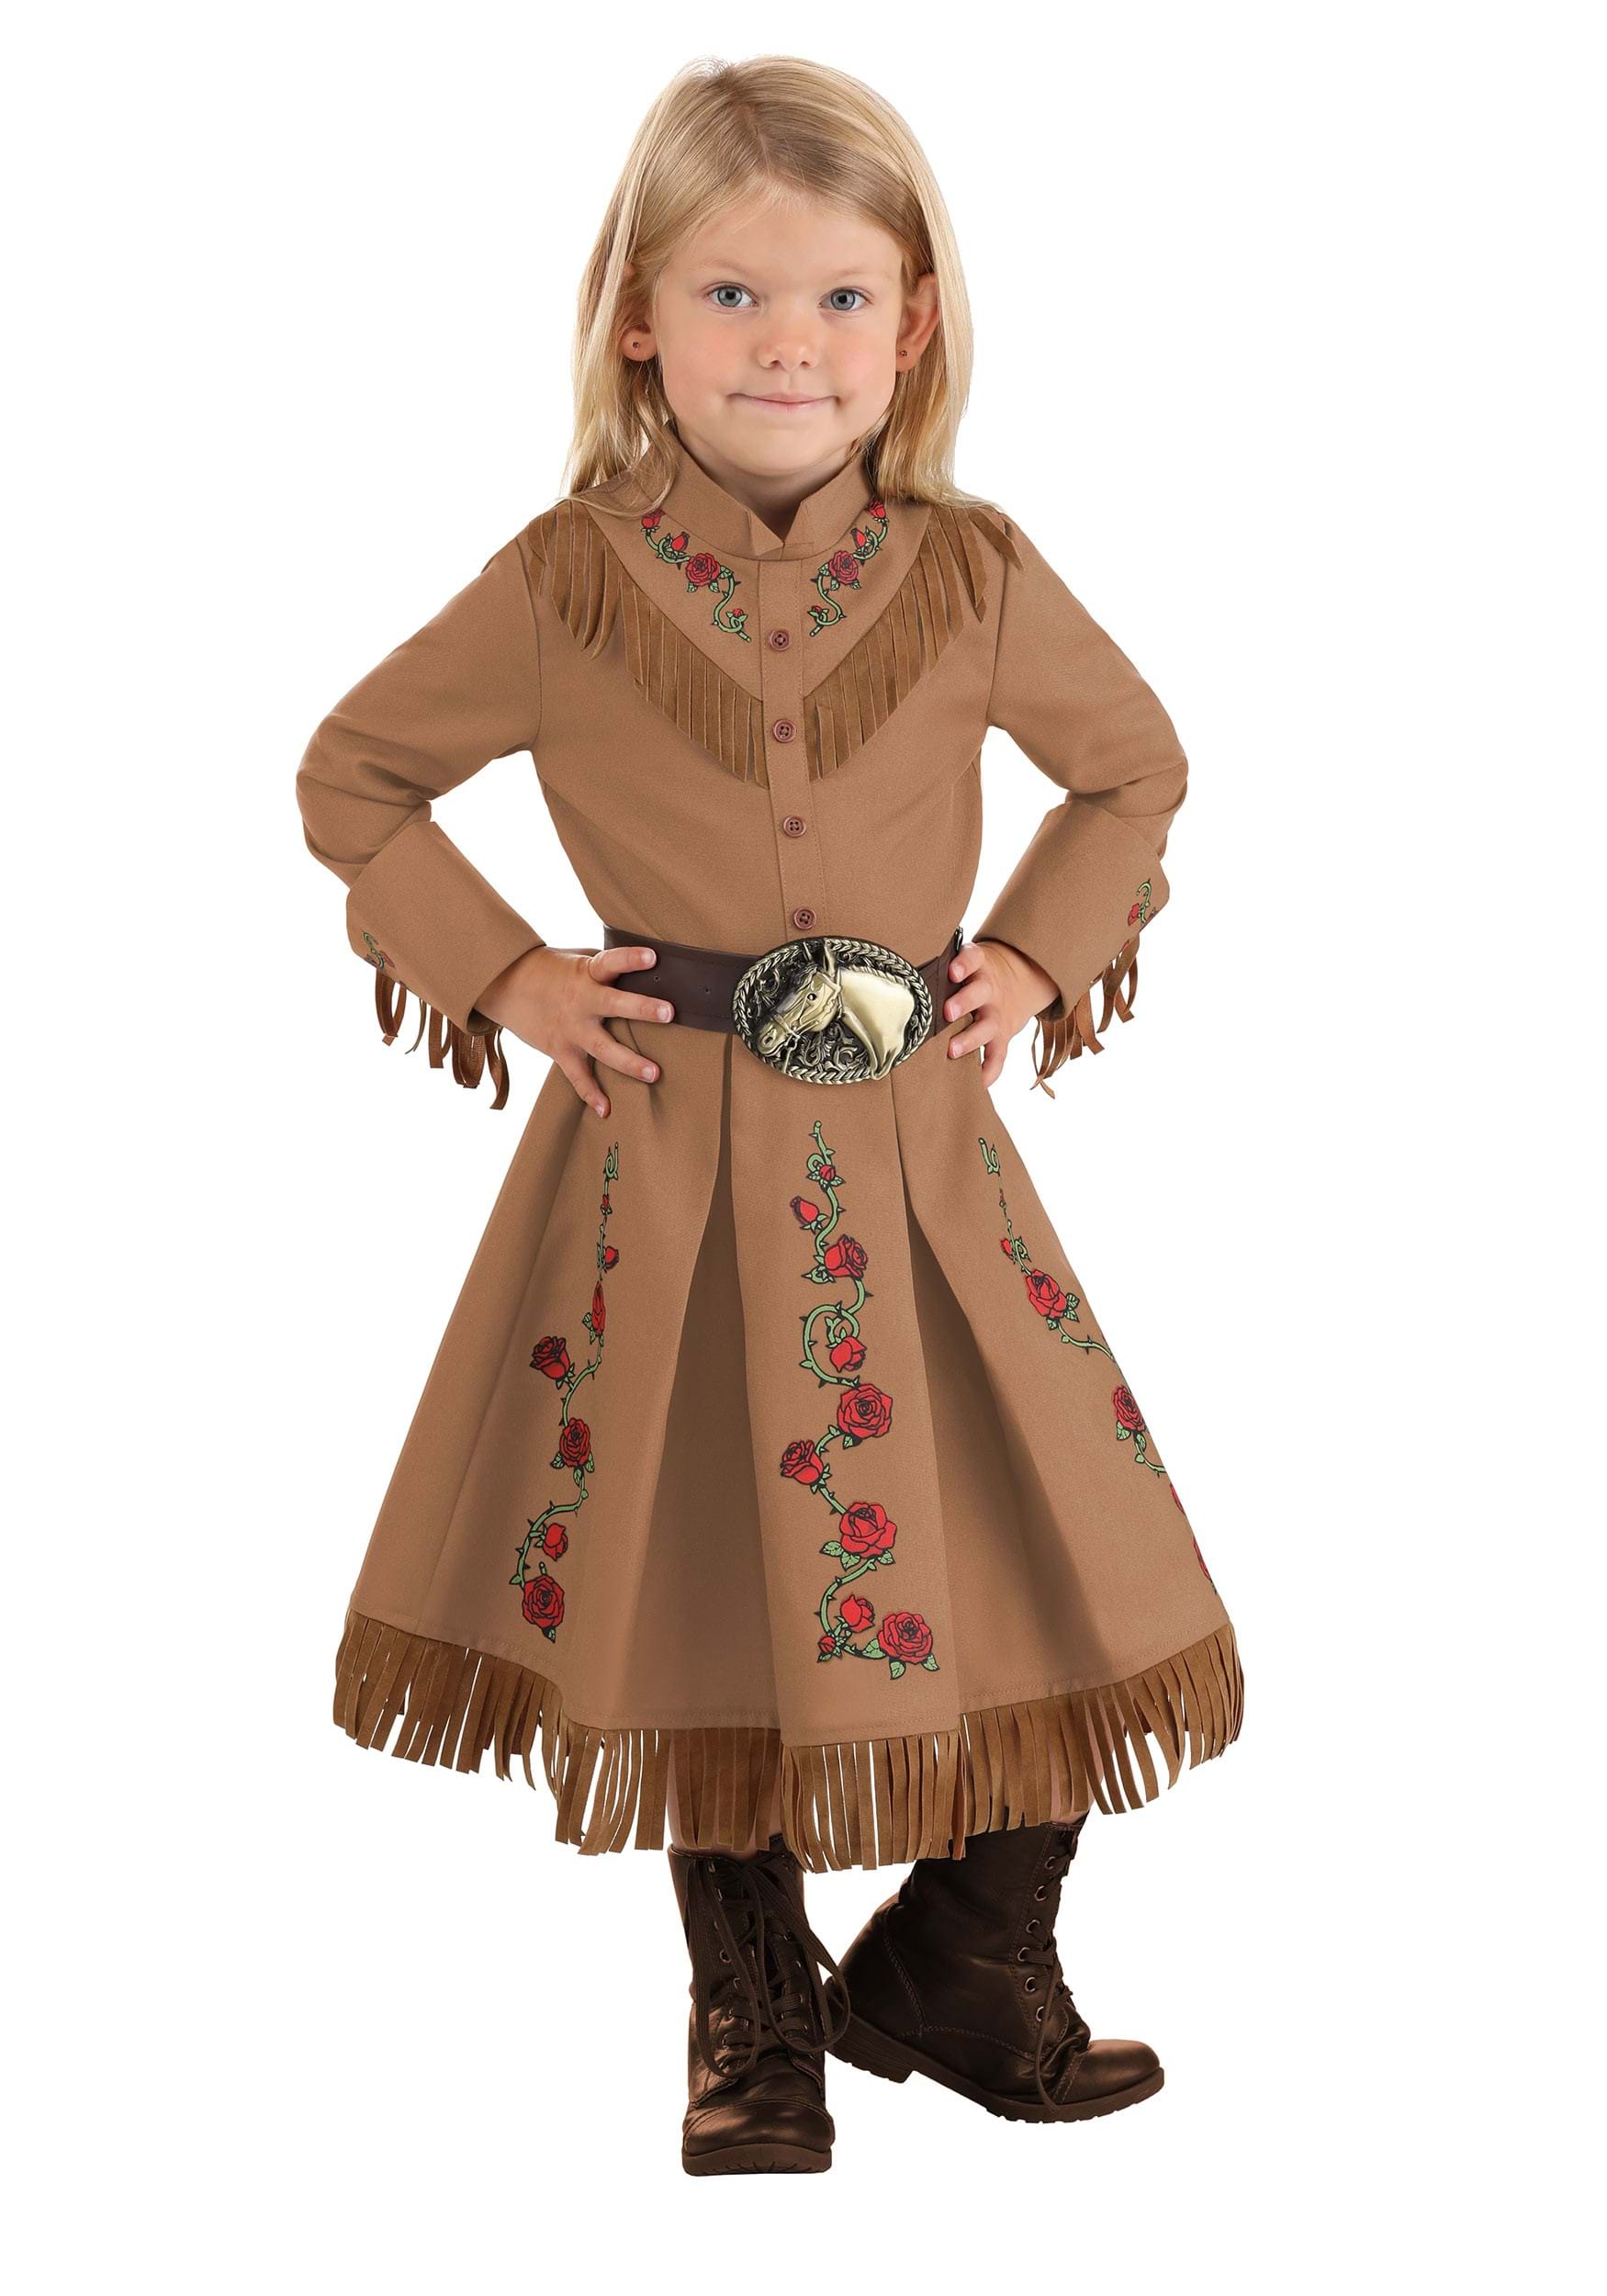 Photos - Fancy Dress Oakley FUN Costumes Annie  Cowgirl Toddler Costume | Historical Costumes Be 